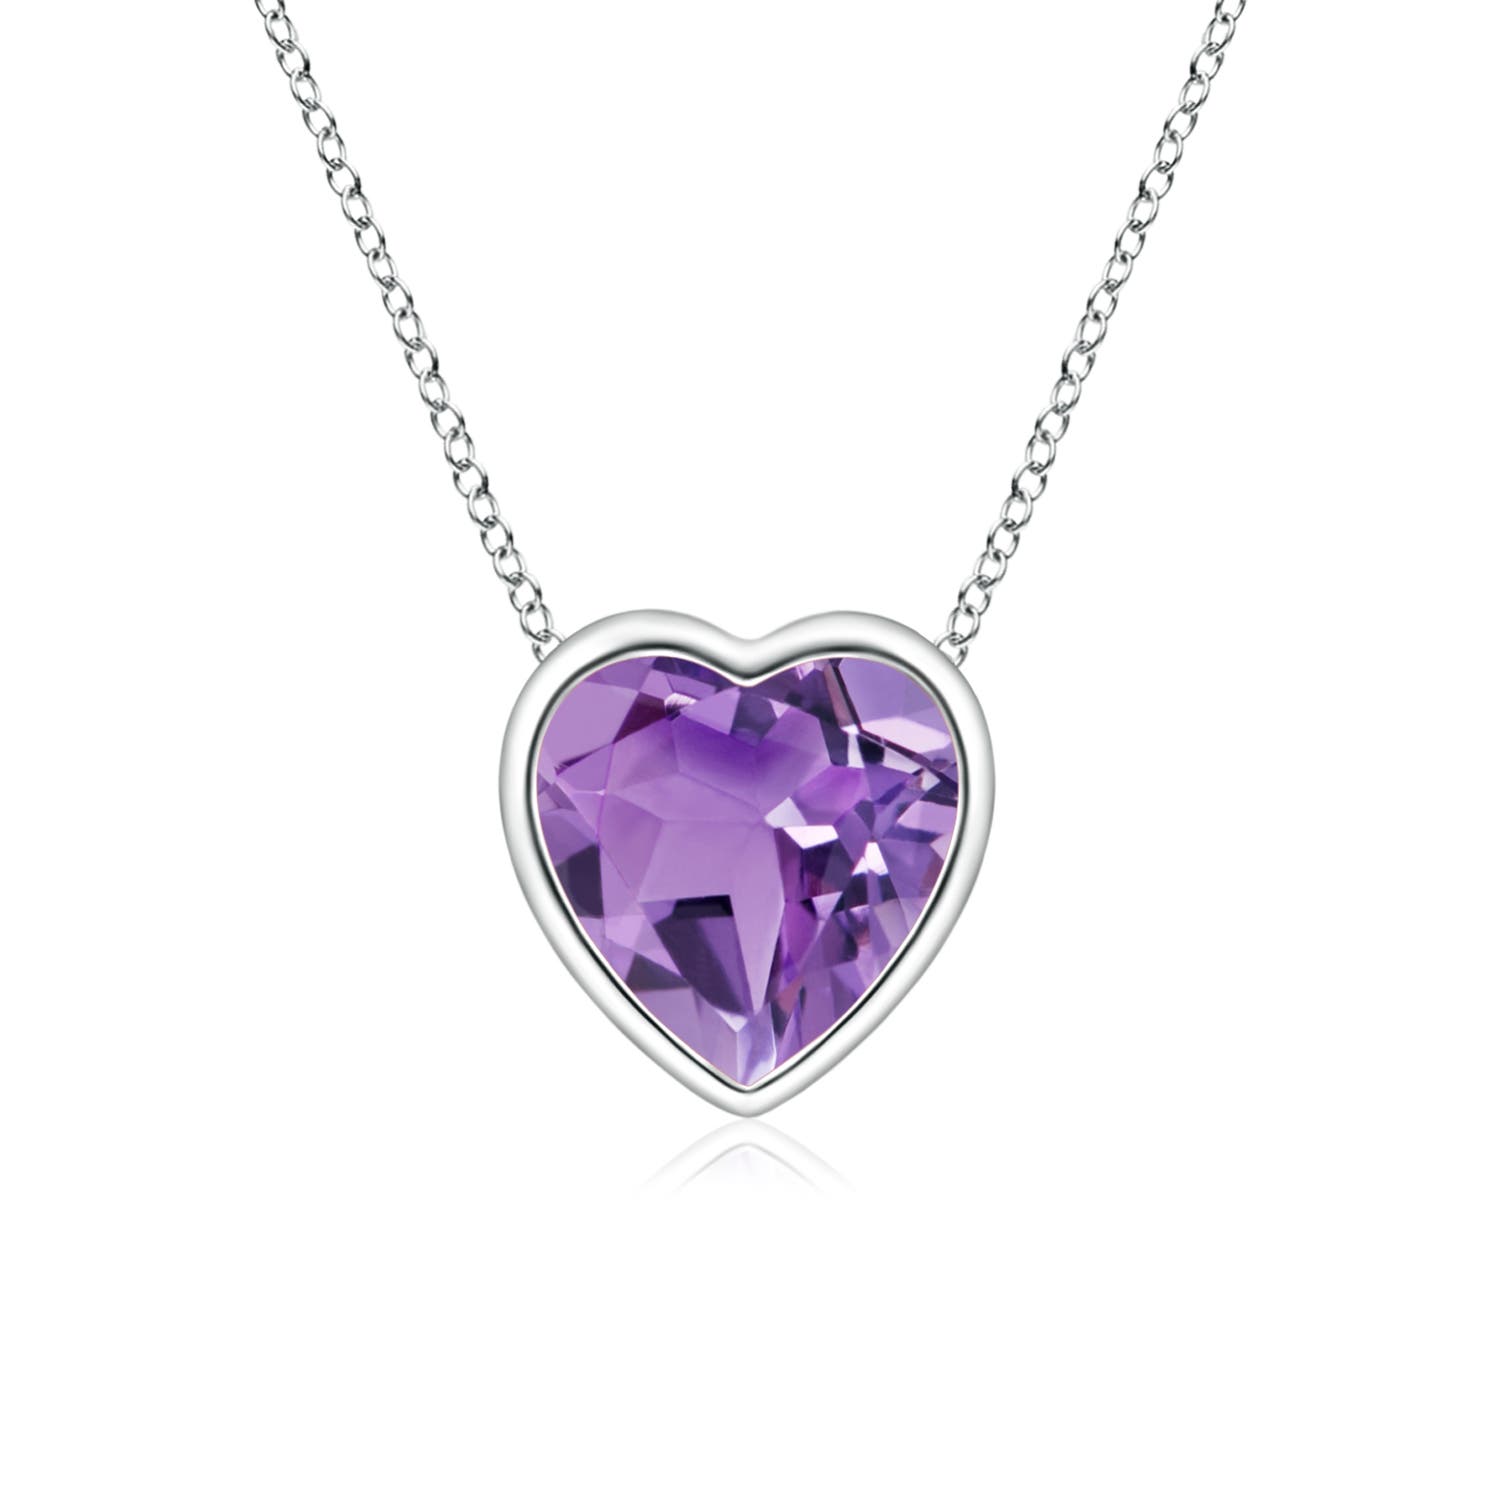 A - Amethyst / 0.35 CT / 14 KT White Gold